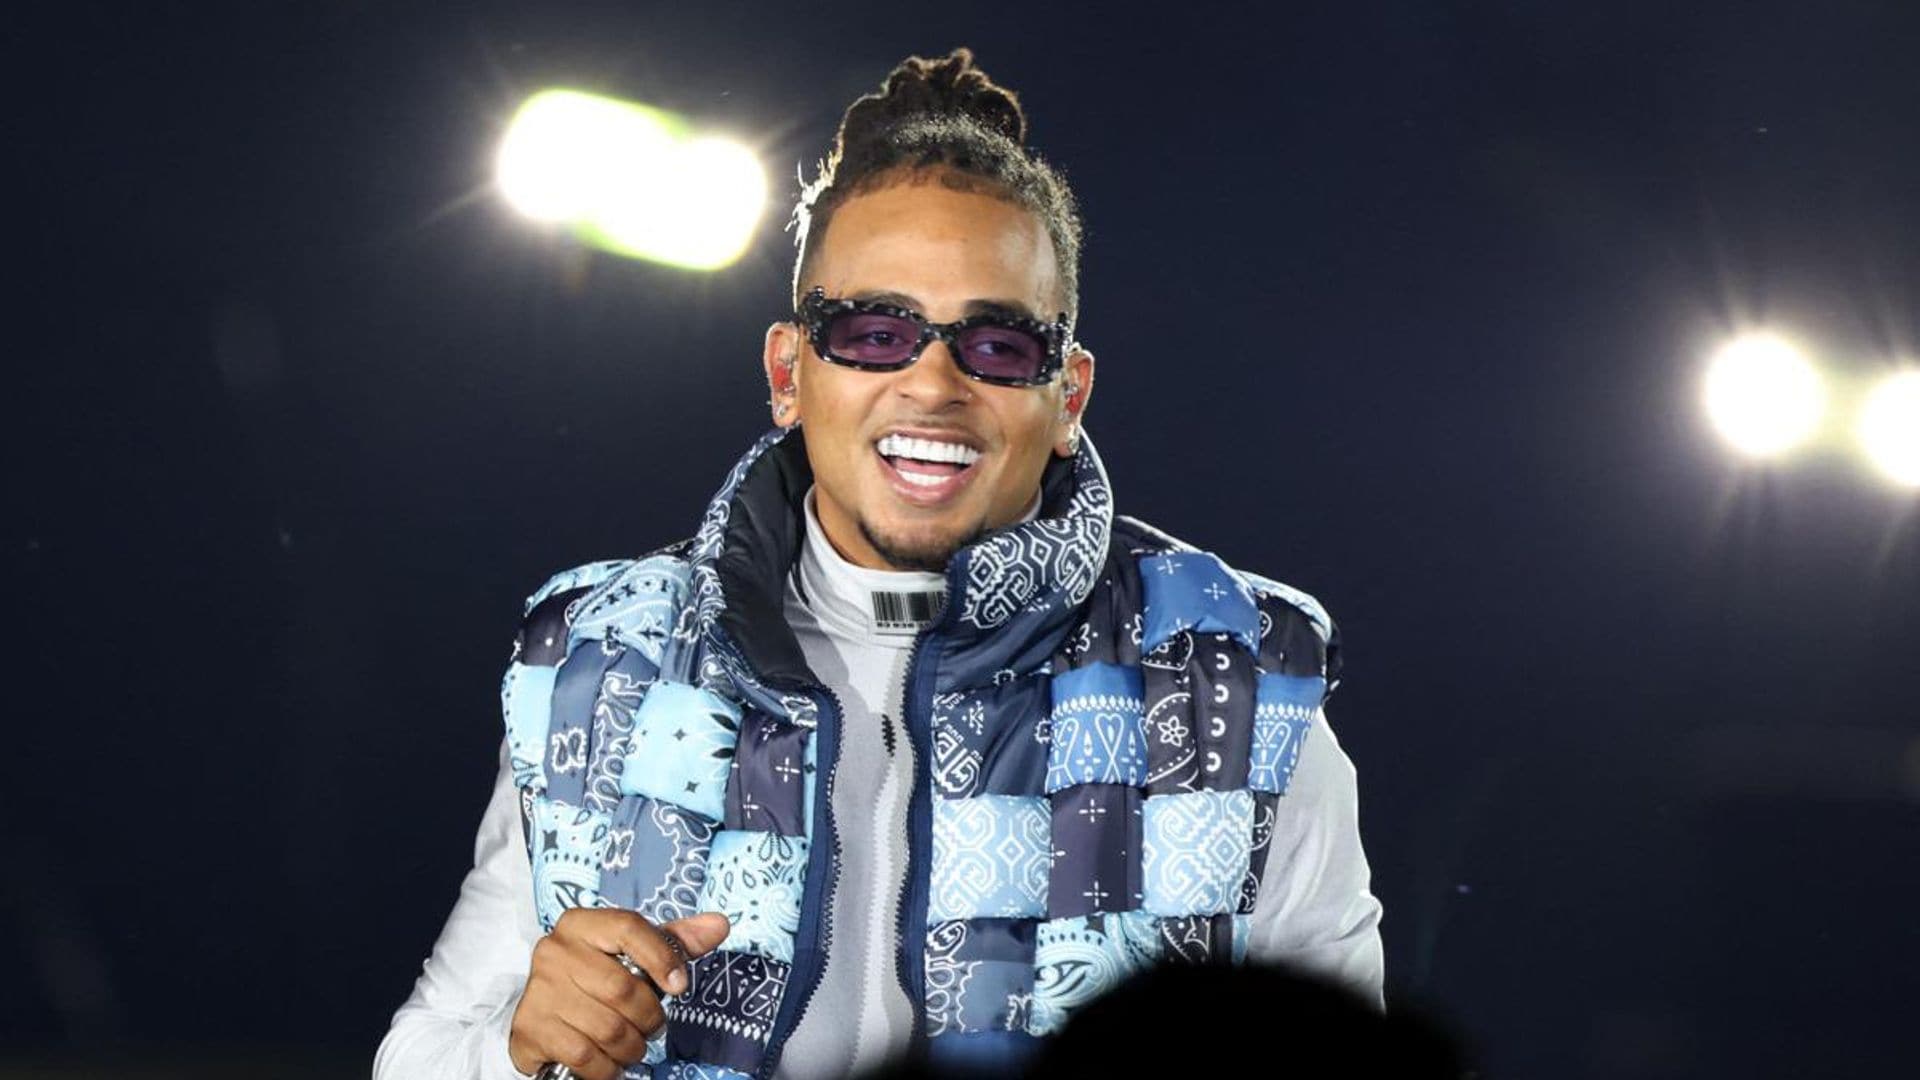 Ozuna surpass Justin Bieber and ties J Balvin as the artist with the most videos in YouTube’s Billion Views Club